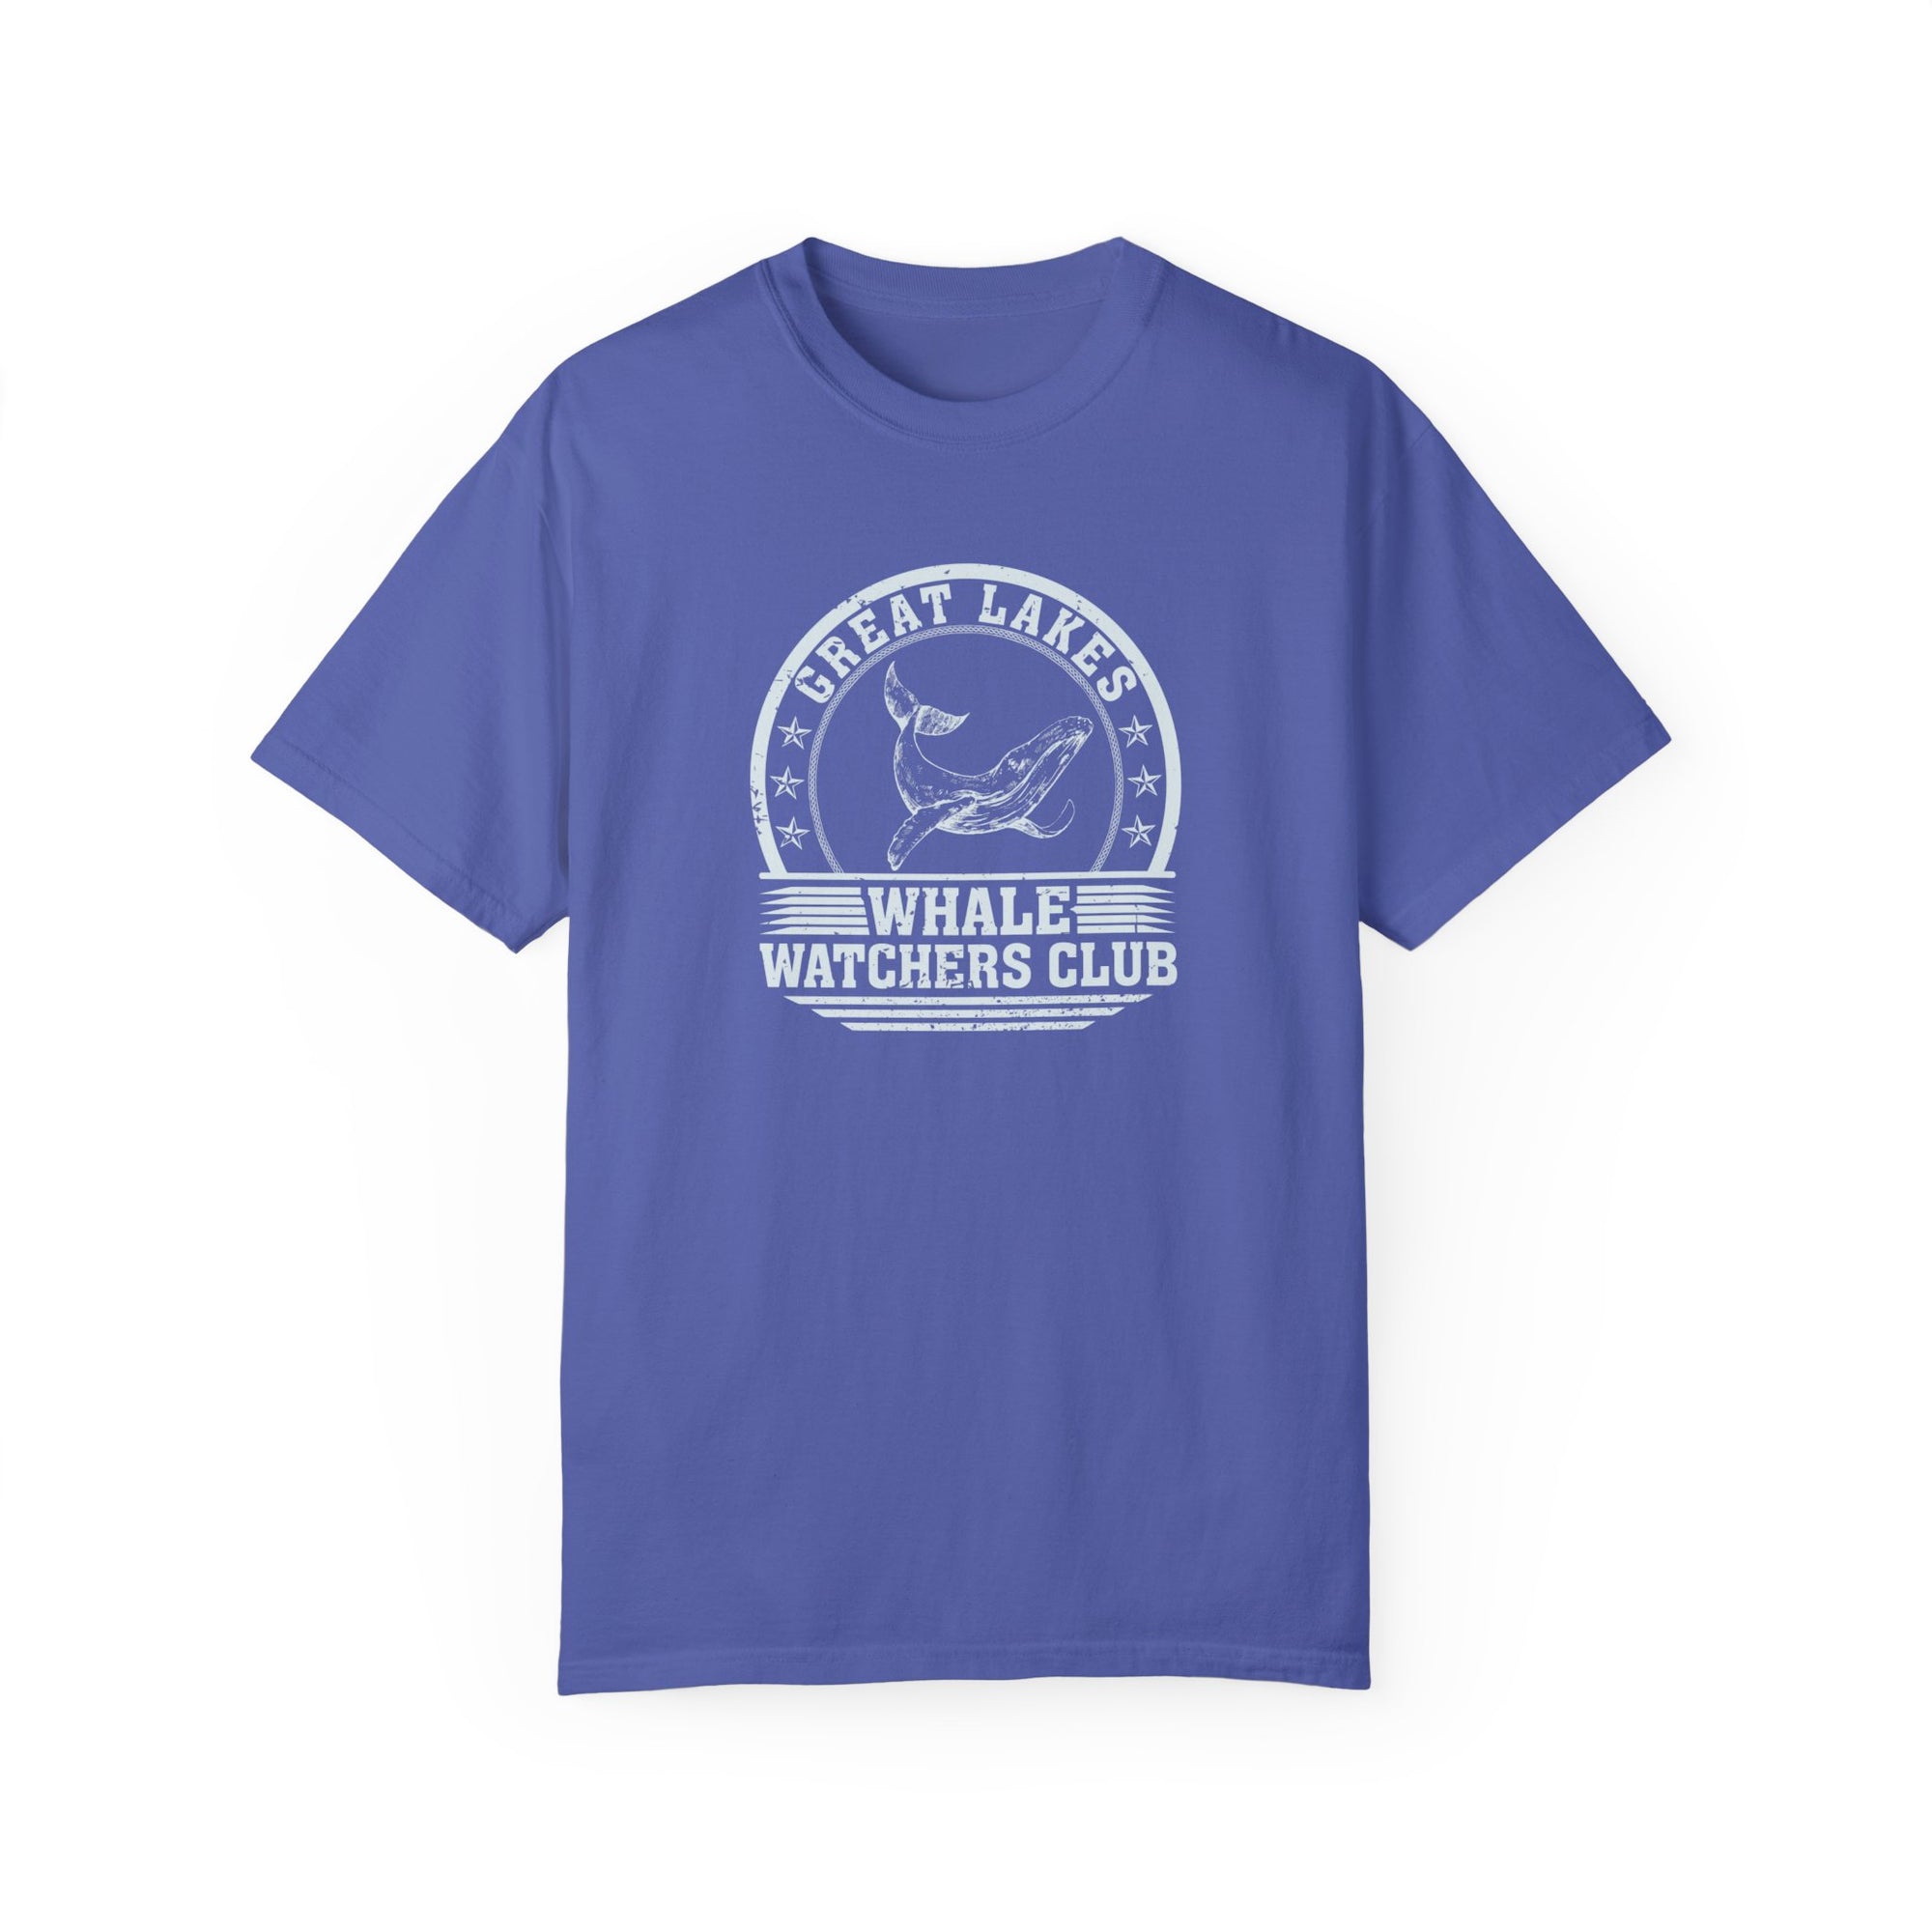 Great Lakes Whale Watchers Tee